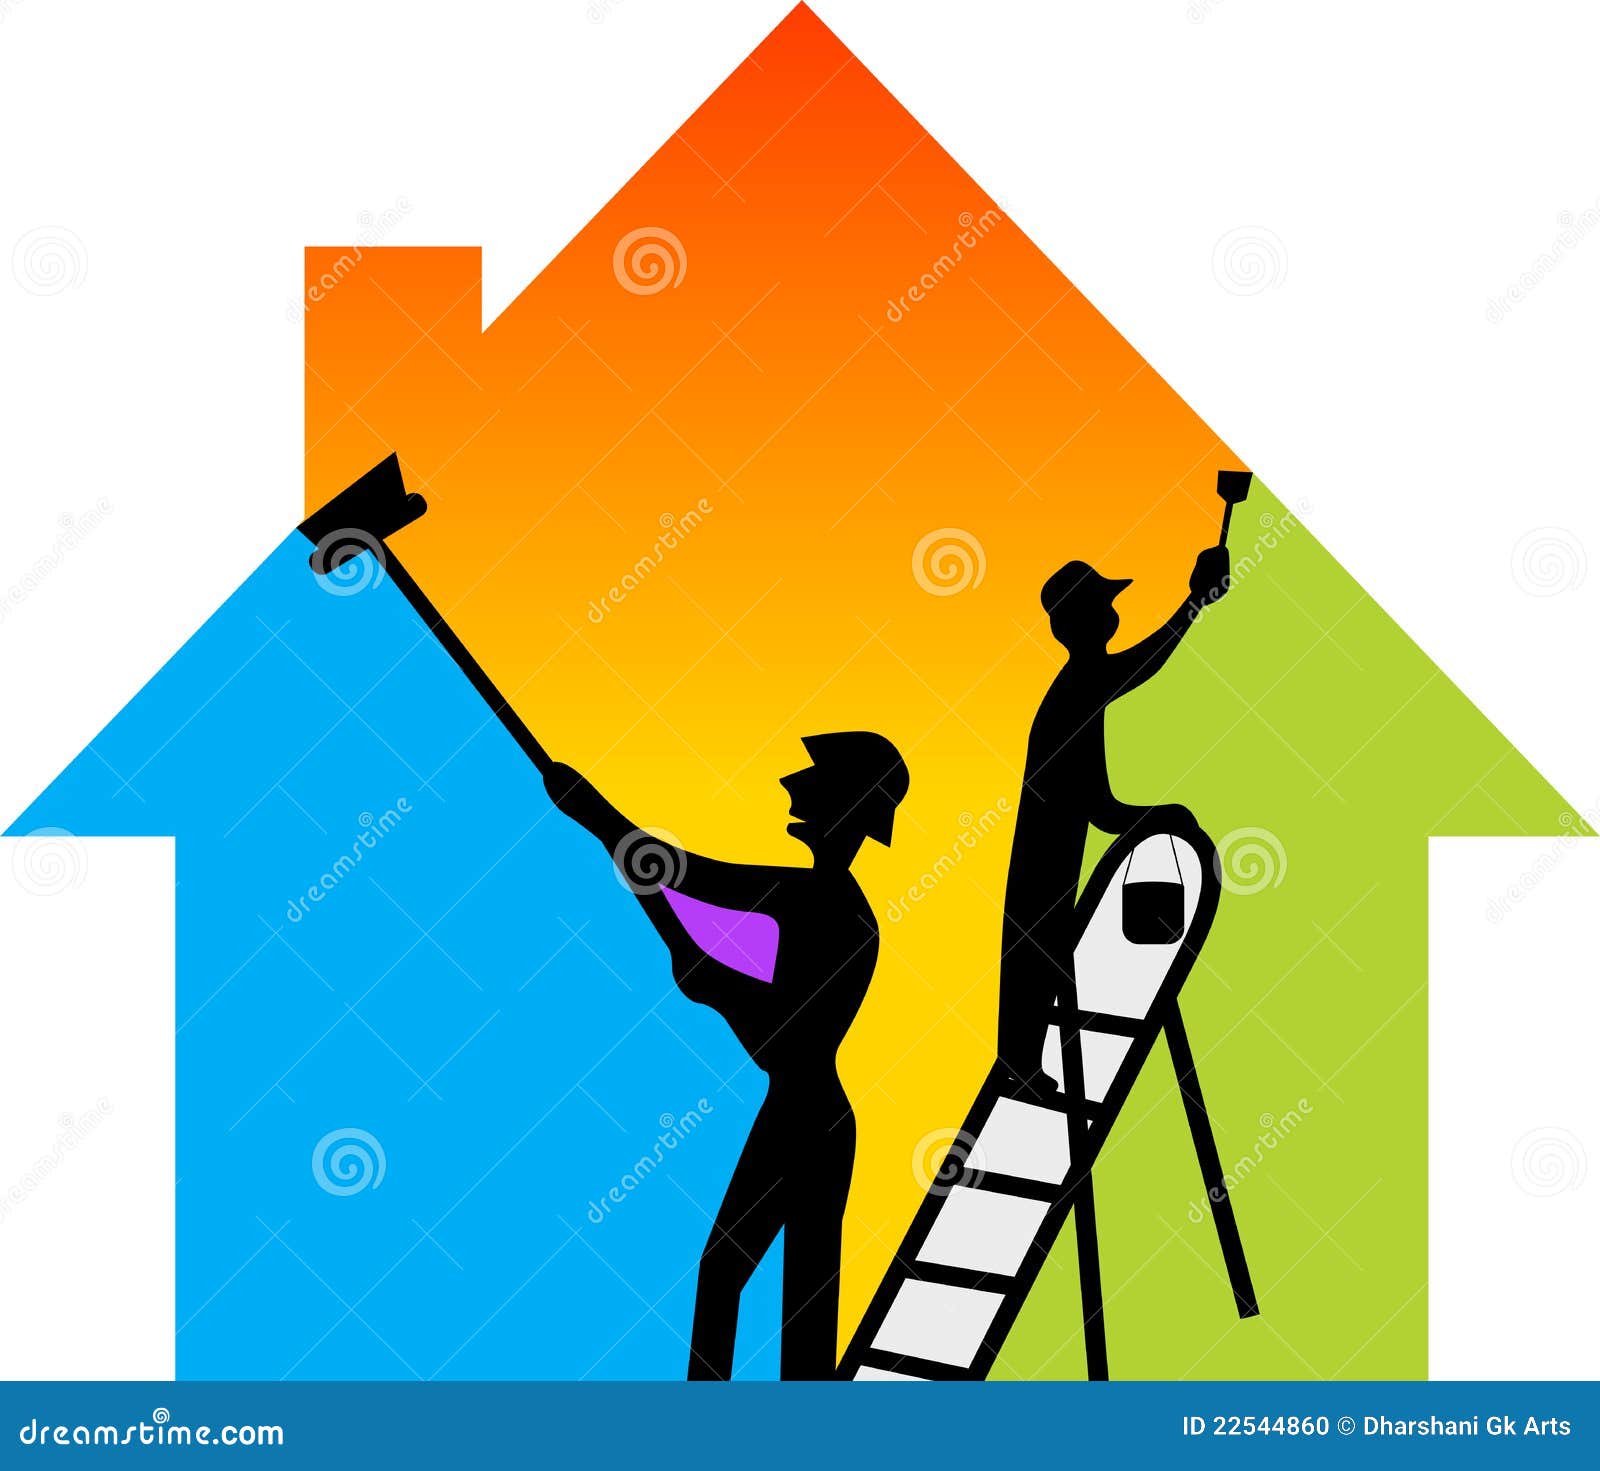 man painting house clipart - photo #23